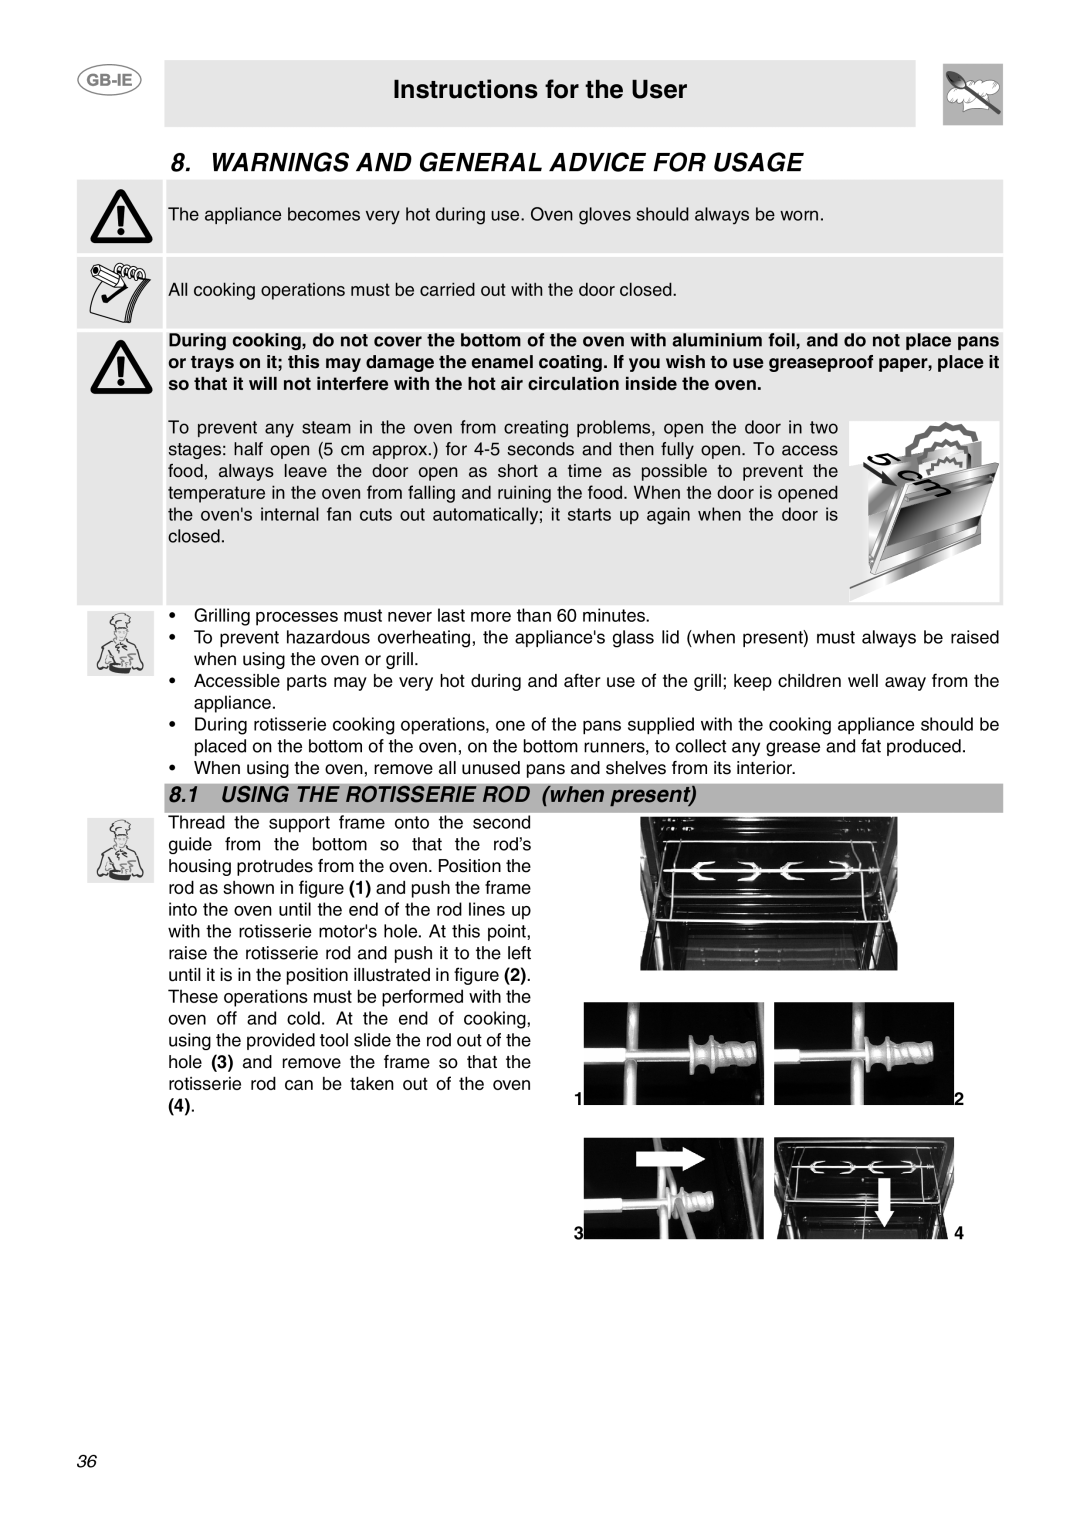 Smeg CE9IMX manual Warnings And General Advice For Usage, USING THE ROTISSERIE ROD when present, Instructions for the User 